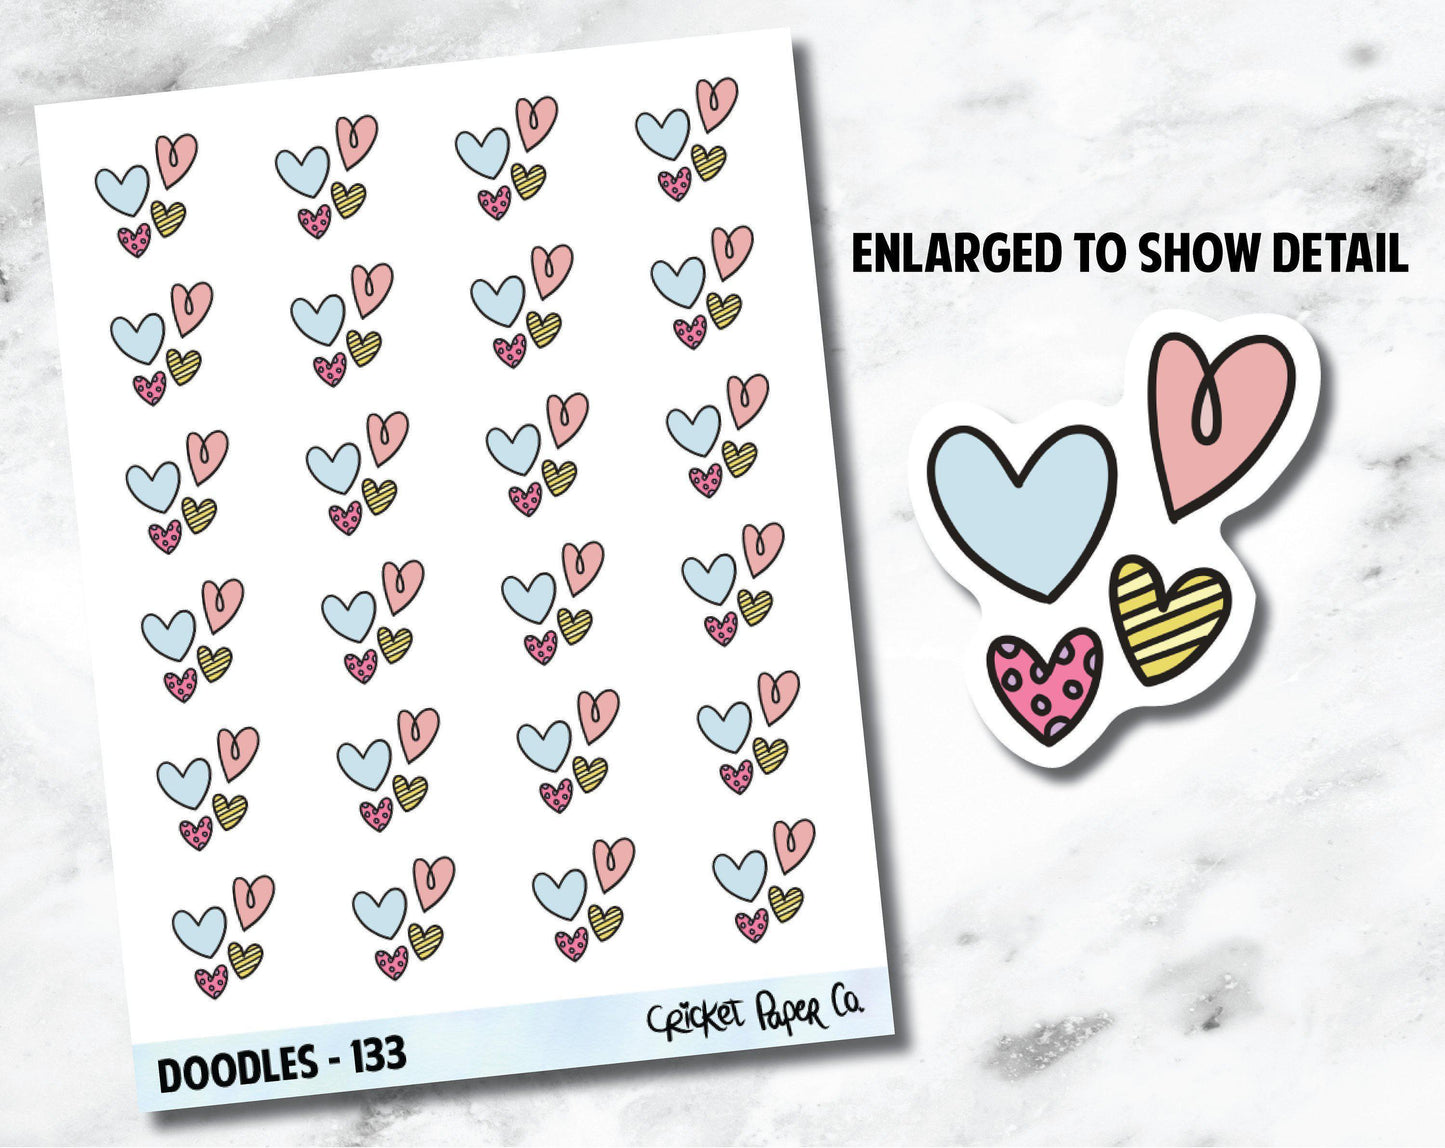 Hearts, Love, Date Night Hand Drawn Doodles - 133-Cricket Paper Co.